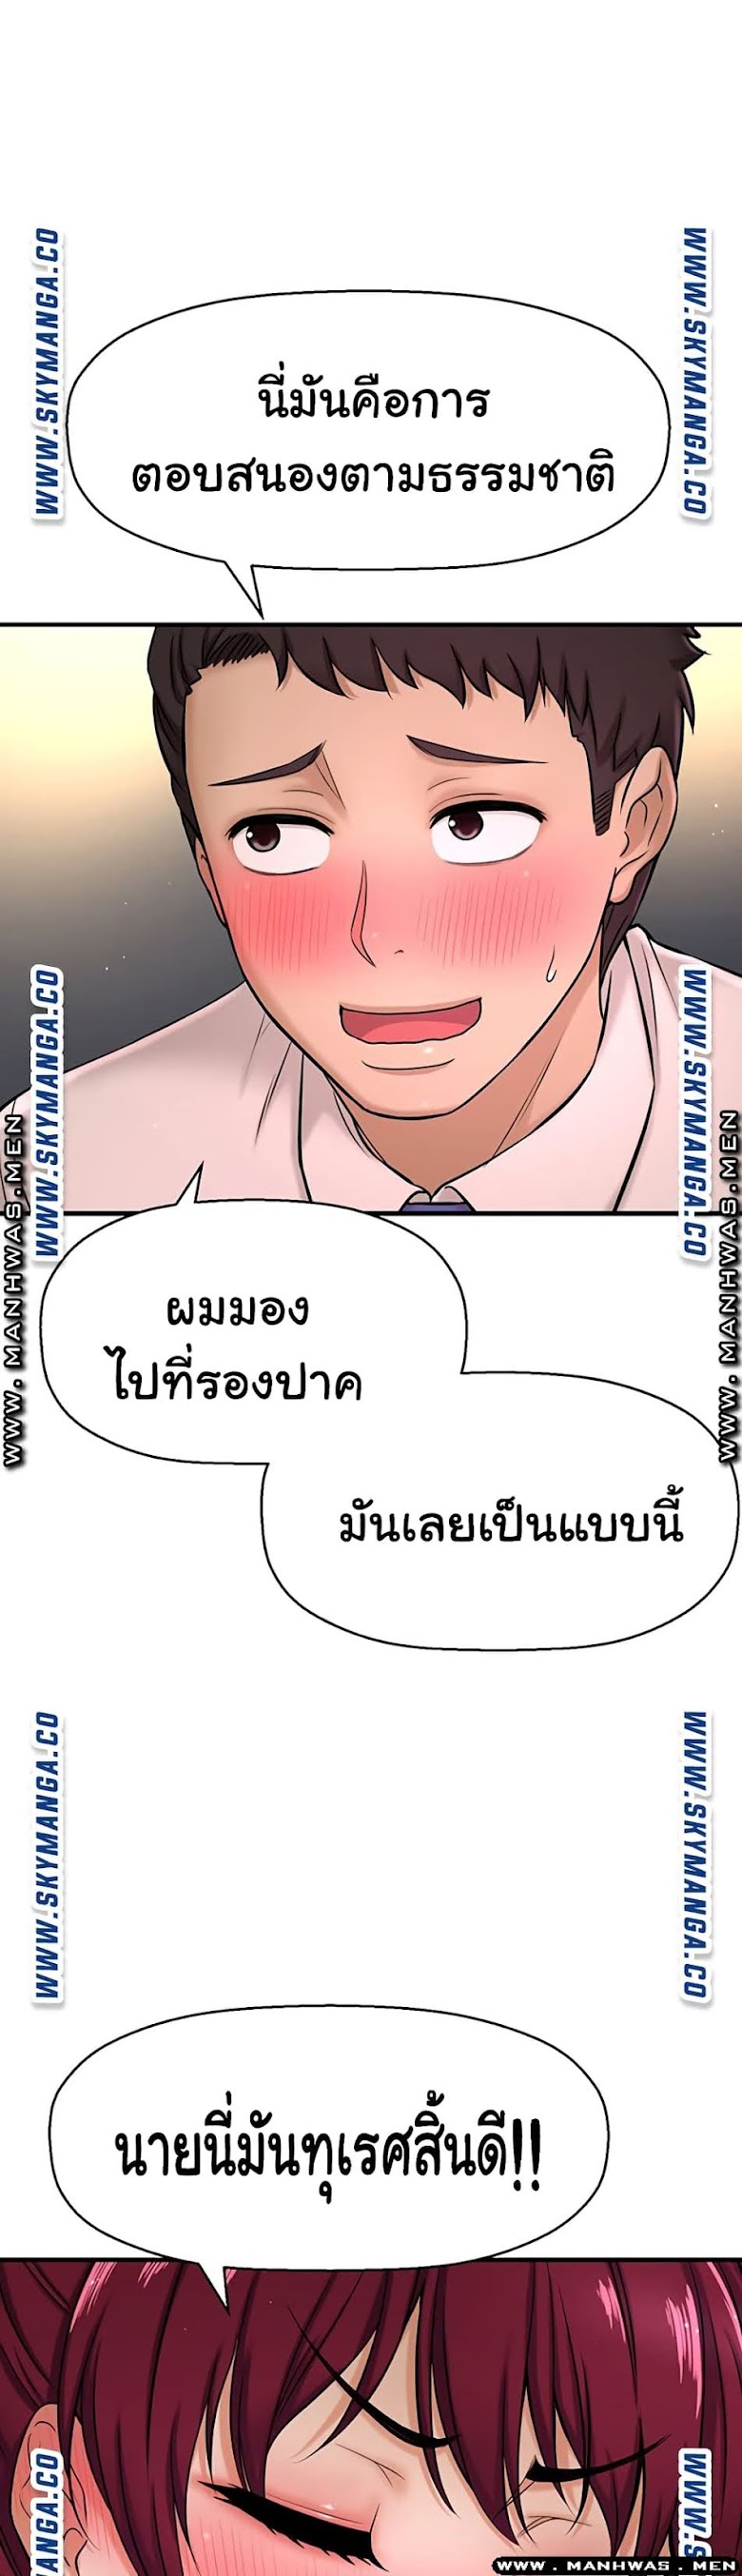 I Want to Know Her - หน้า 36